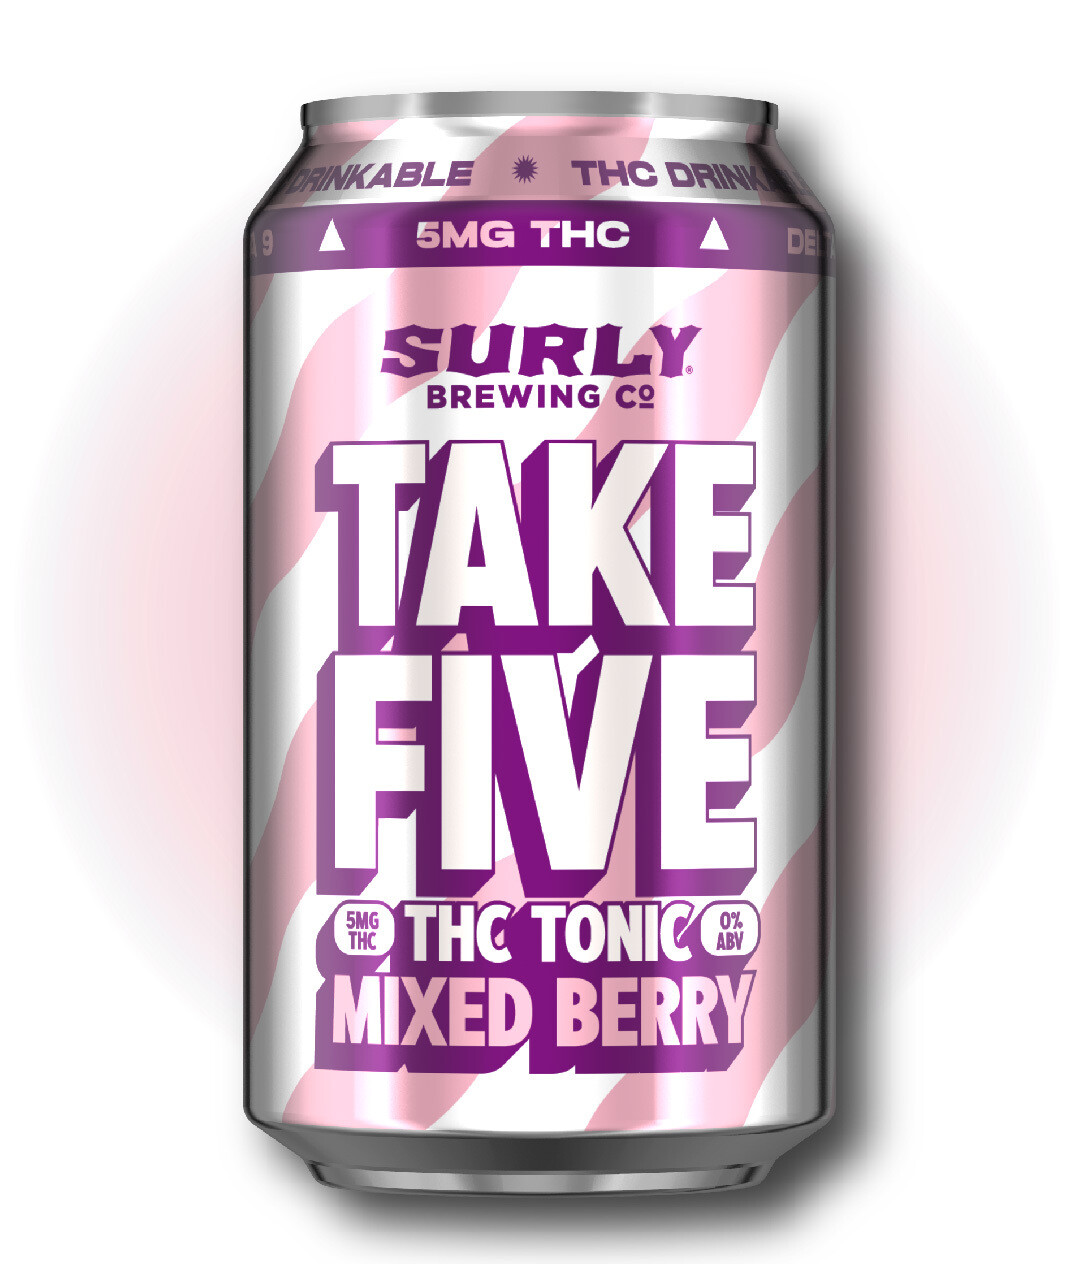 Surly "Take Five" Tonic Mixed Berry Beverage (5mg of THC)